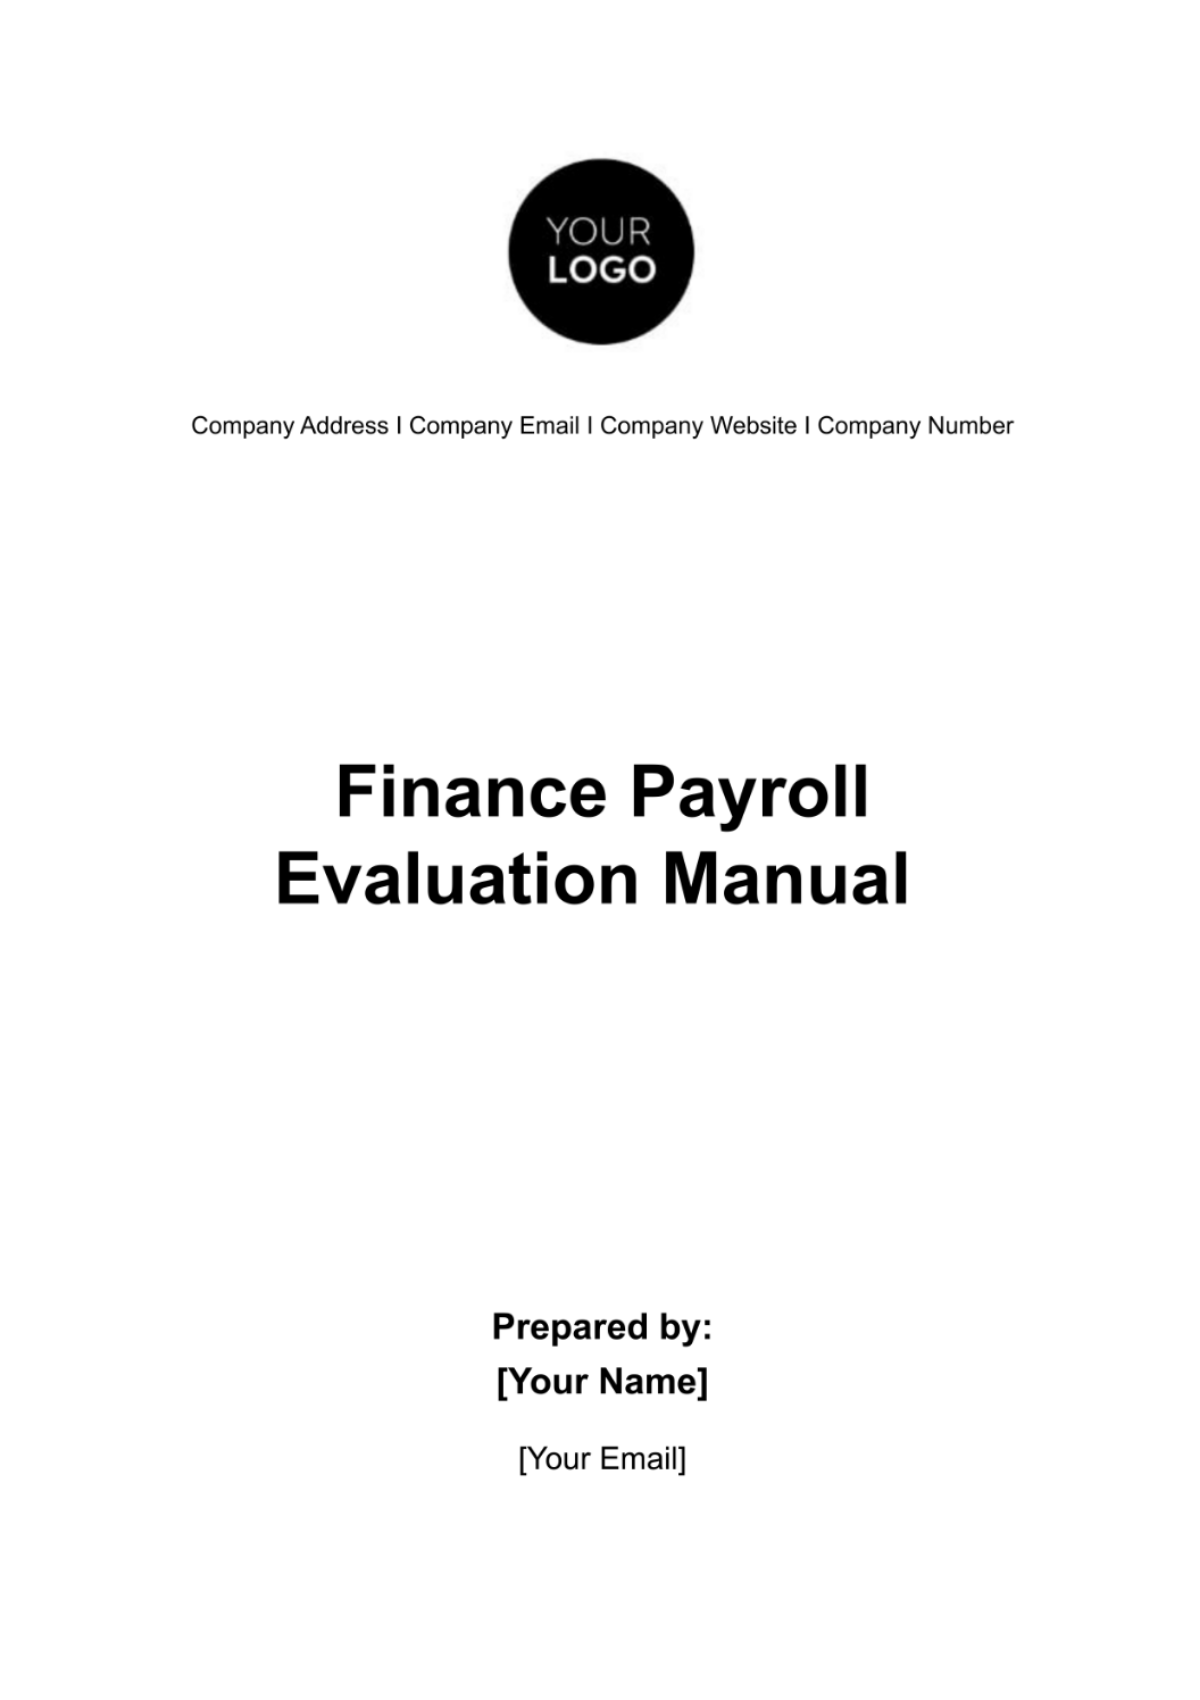 Finance Payroll Evaluation Manual Template